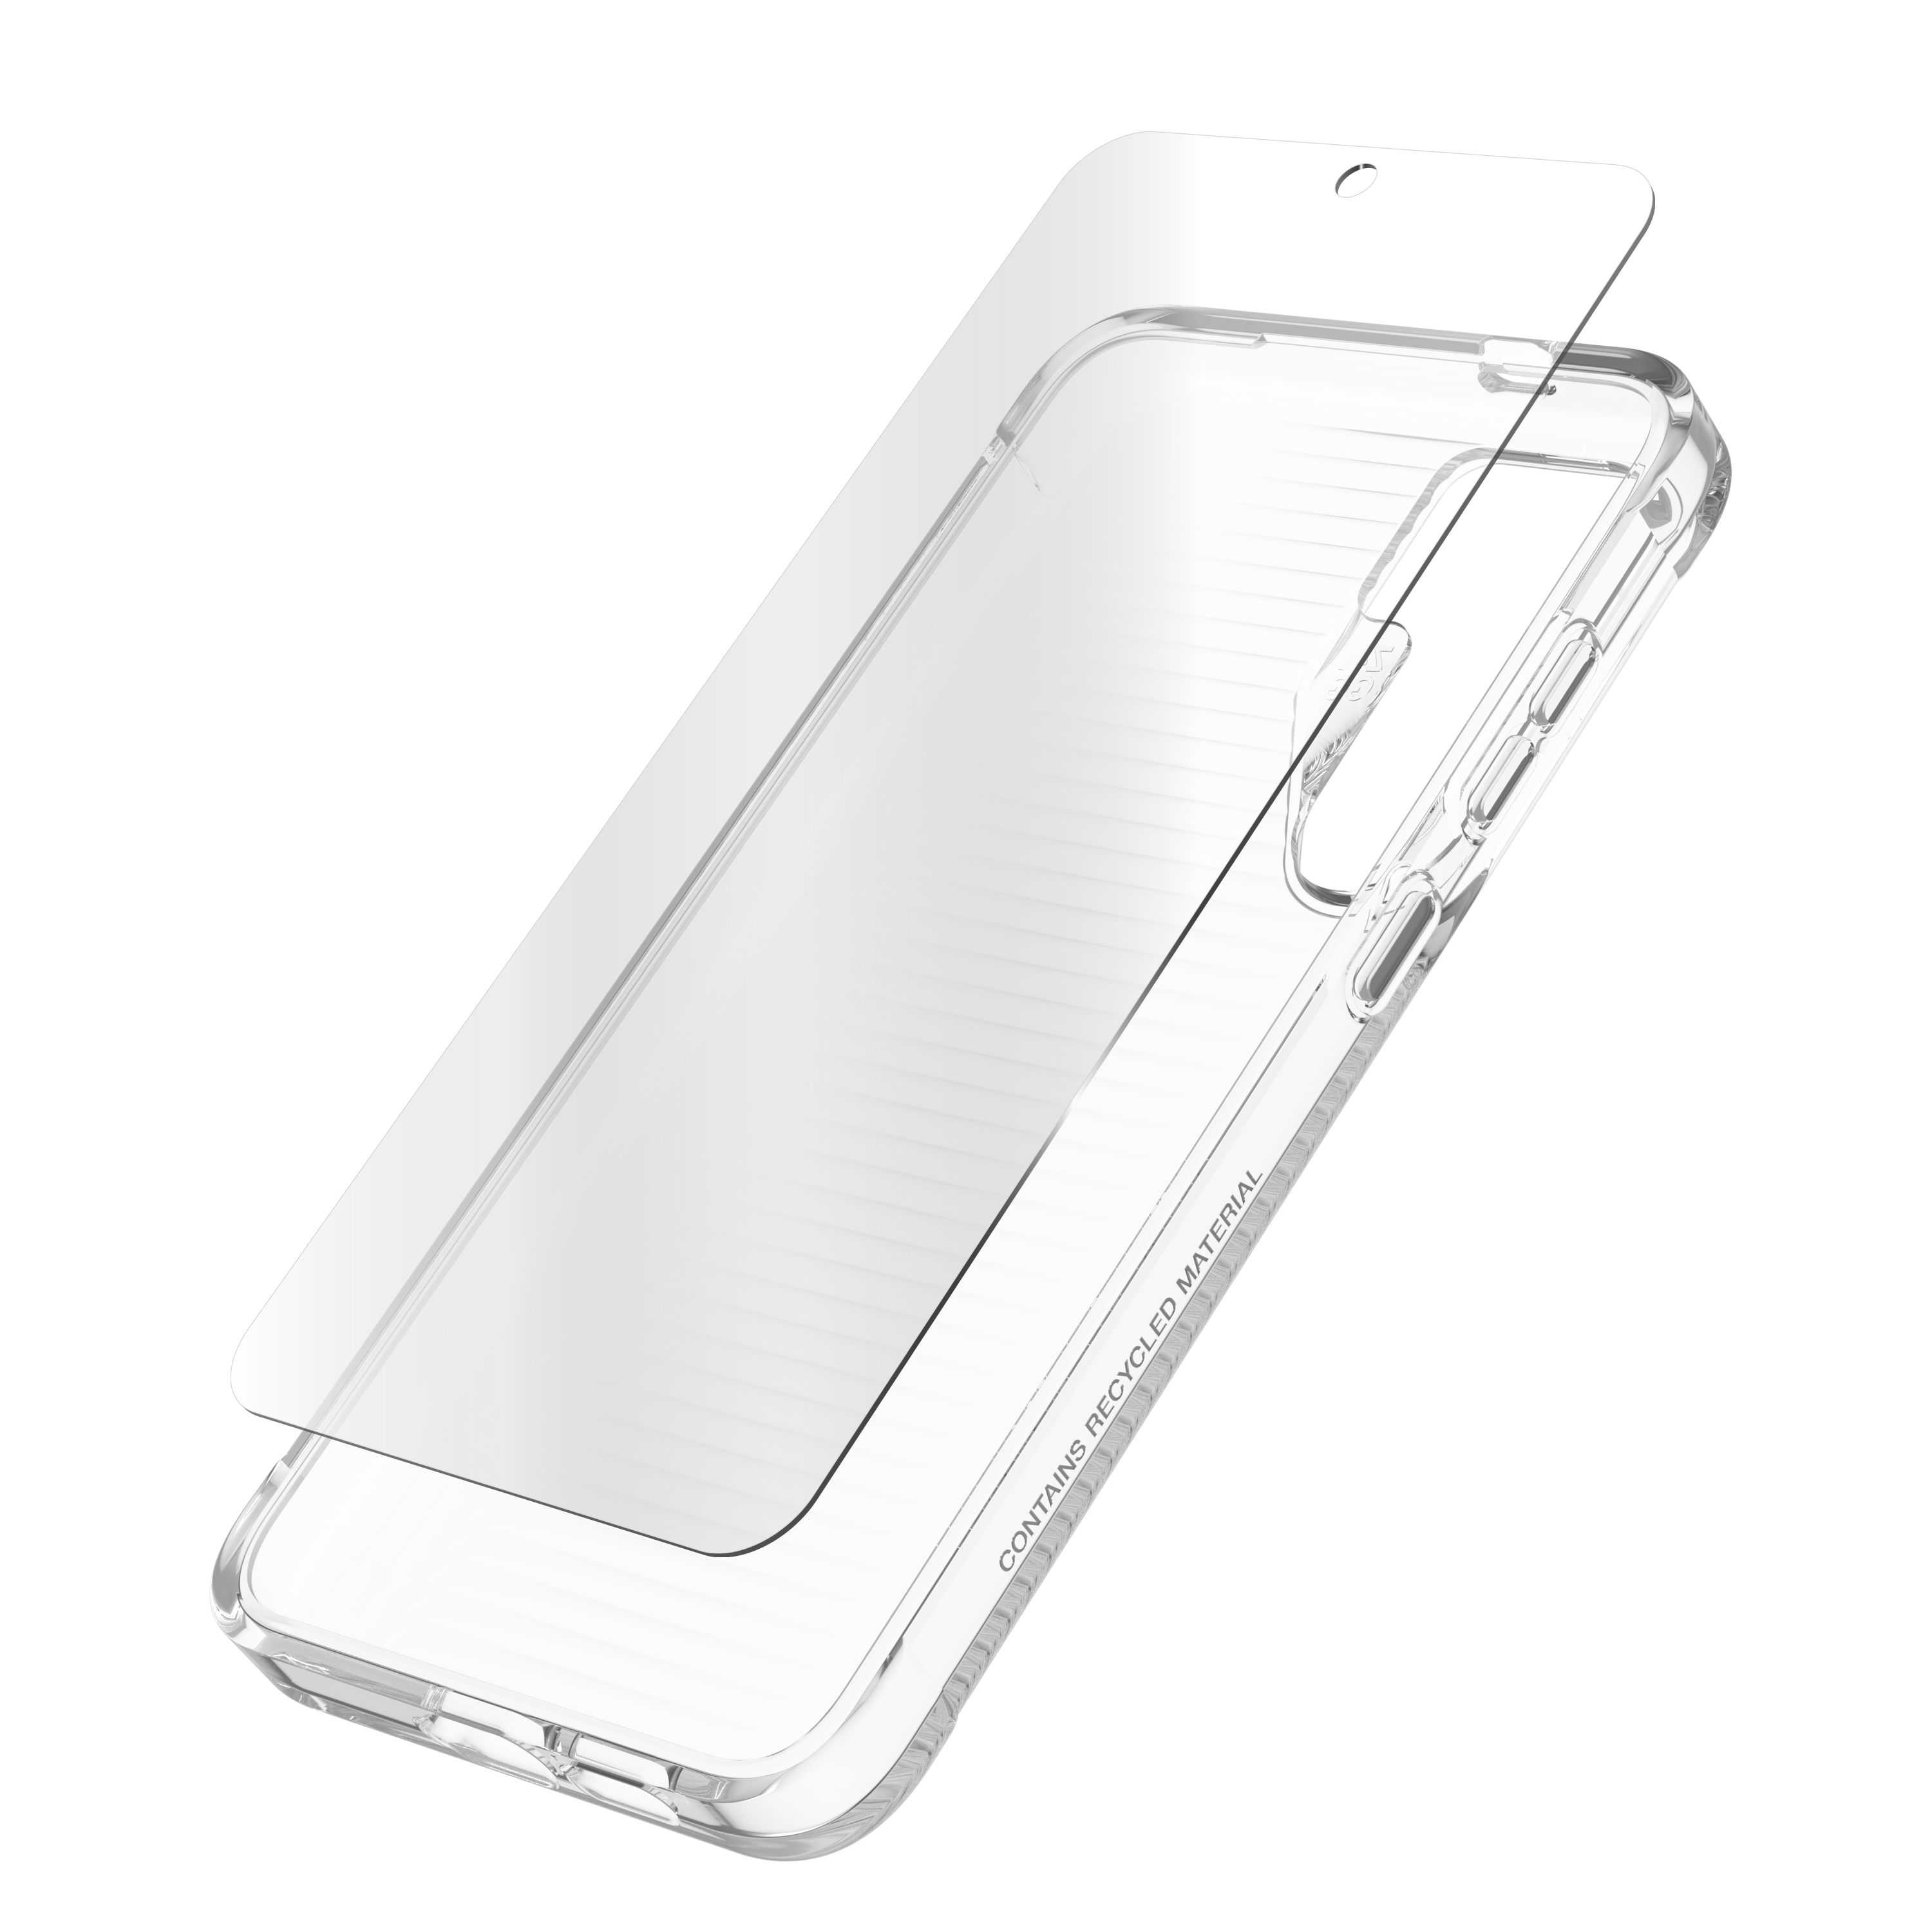 10ft | 3m Drop Protection
|| Luxe Case has been tested and proven to protect your phone from drops up to 10 feet (3 meters).